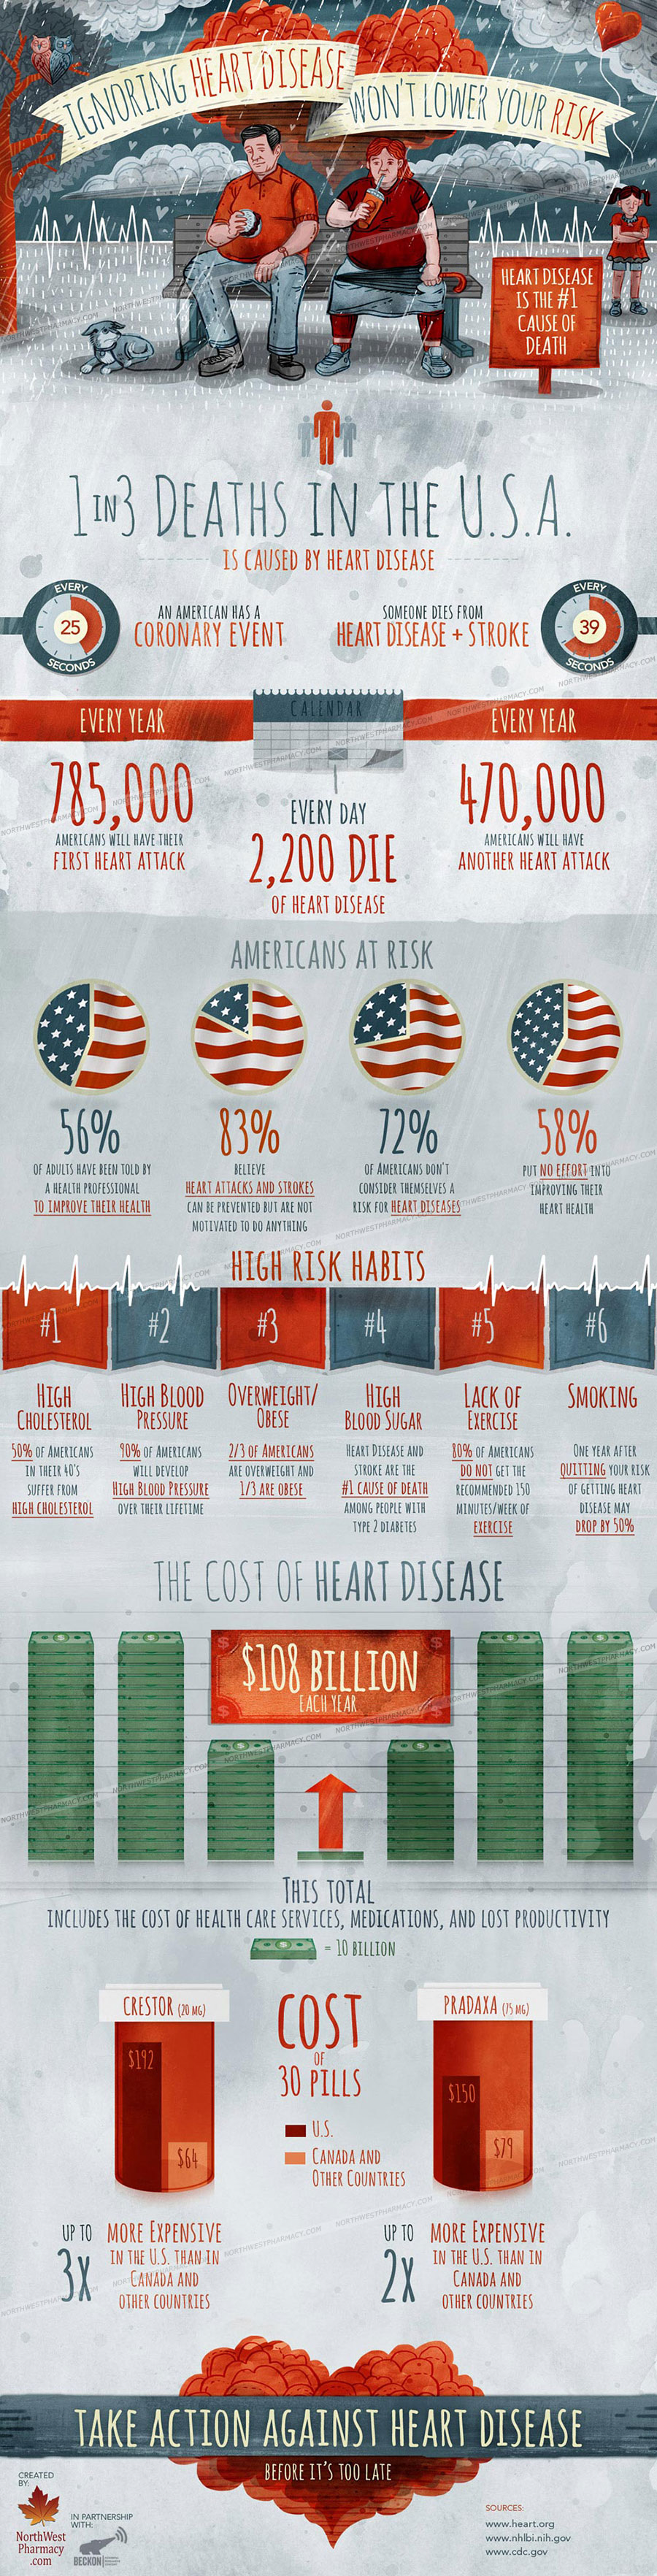 Ignoring Heart Disease Won’t Lower Your Risk - Infographic